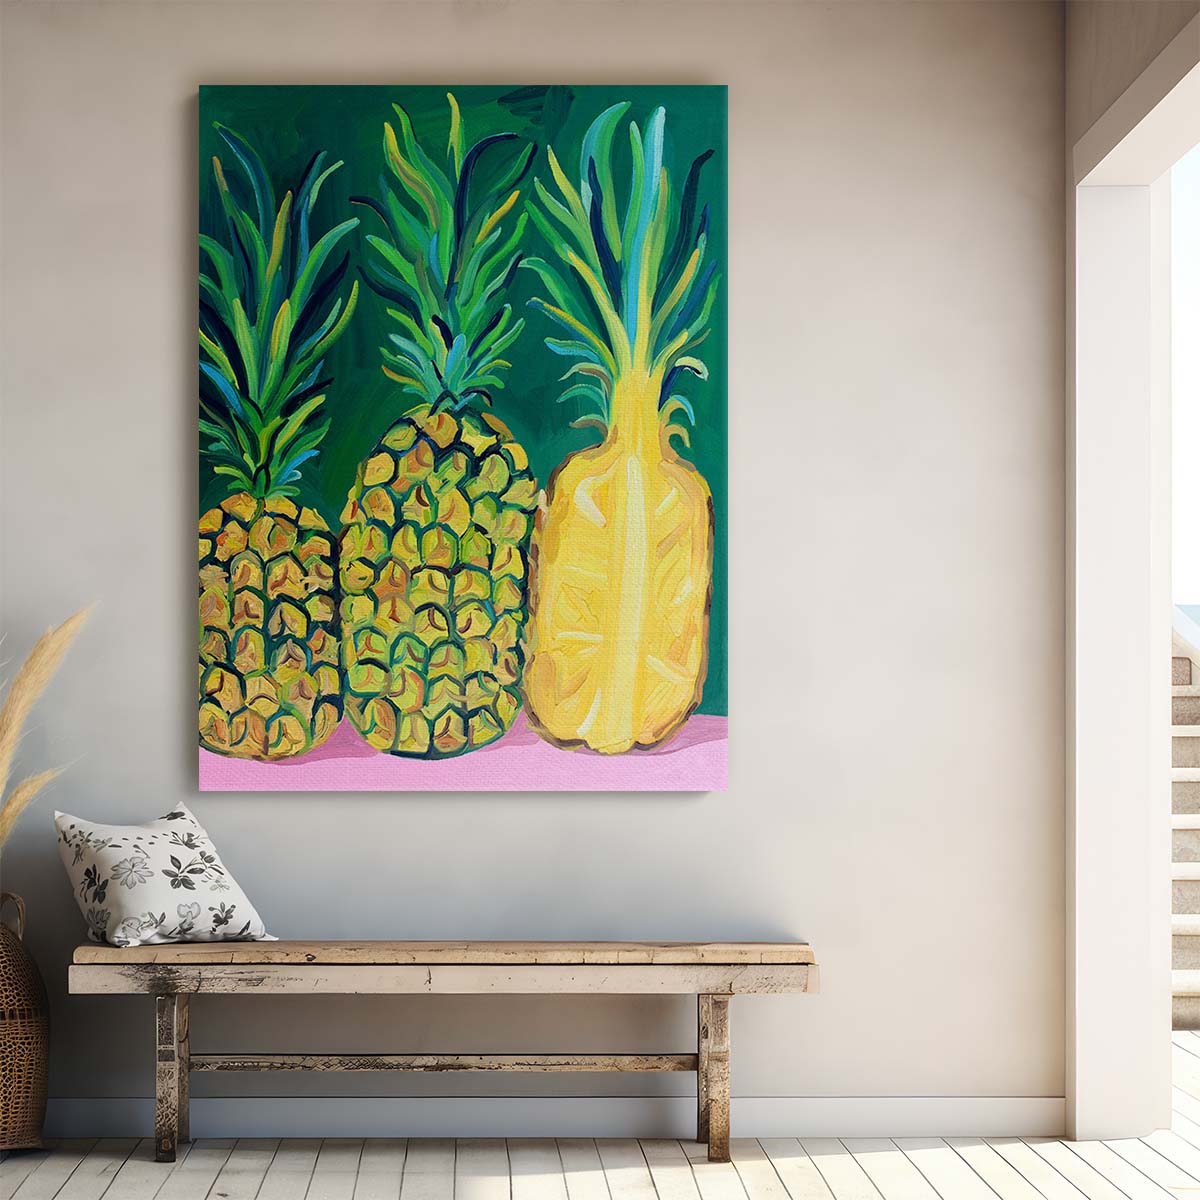 Colorful Pineapple Fruit Illustration for Kitchen Wall Art by Luxuriance Designs, made in USA